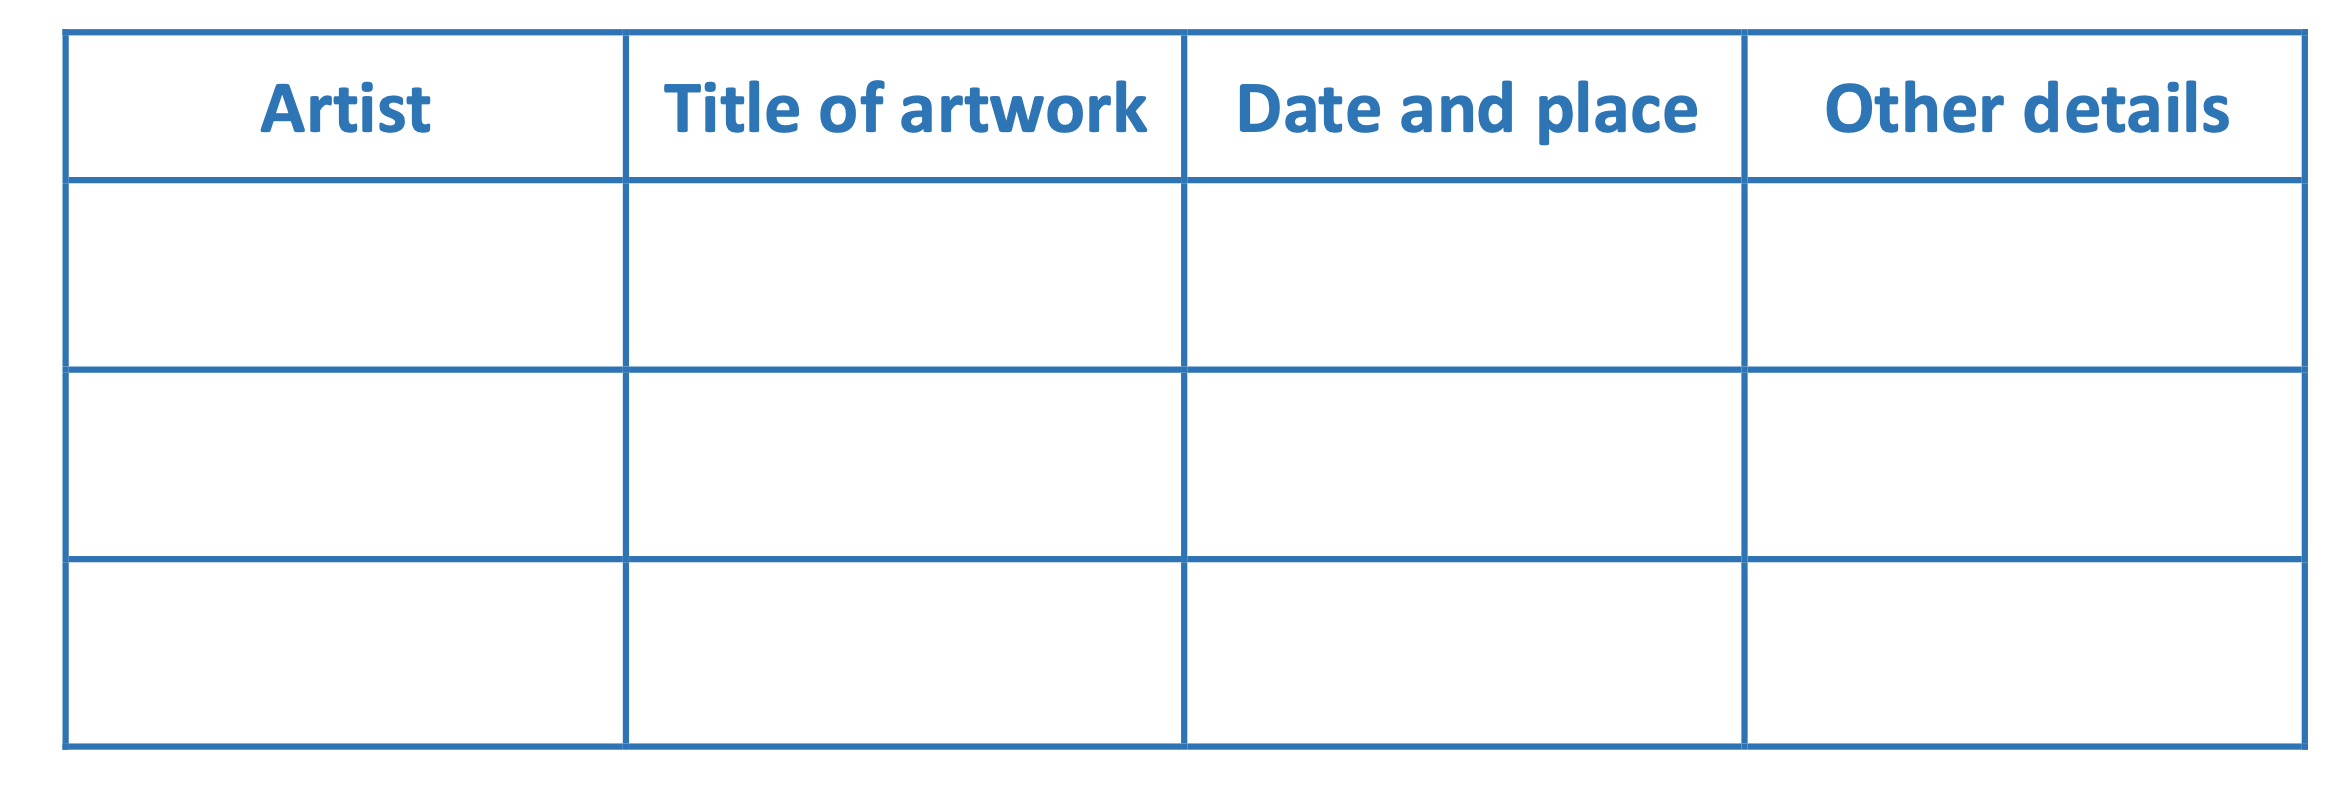 a blank table that students can use to record information about artworks. It includes four columns: Artist, Title of artwork, Date and place, and Other details.